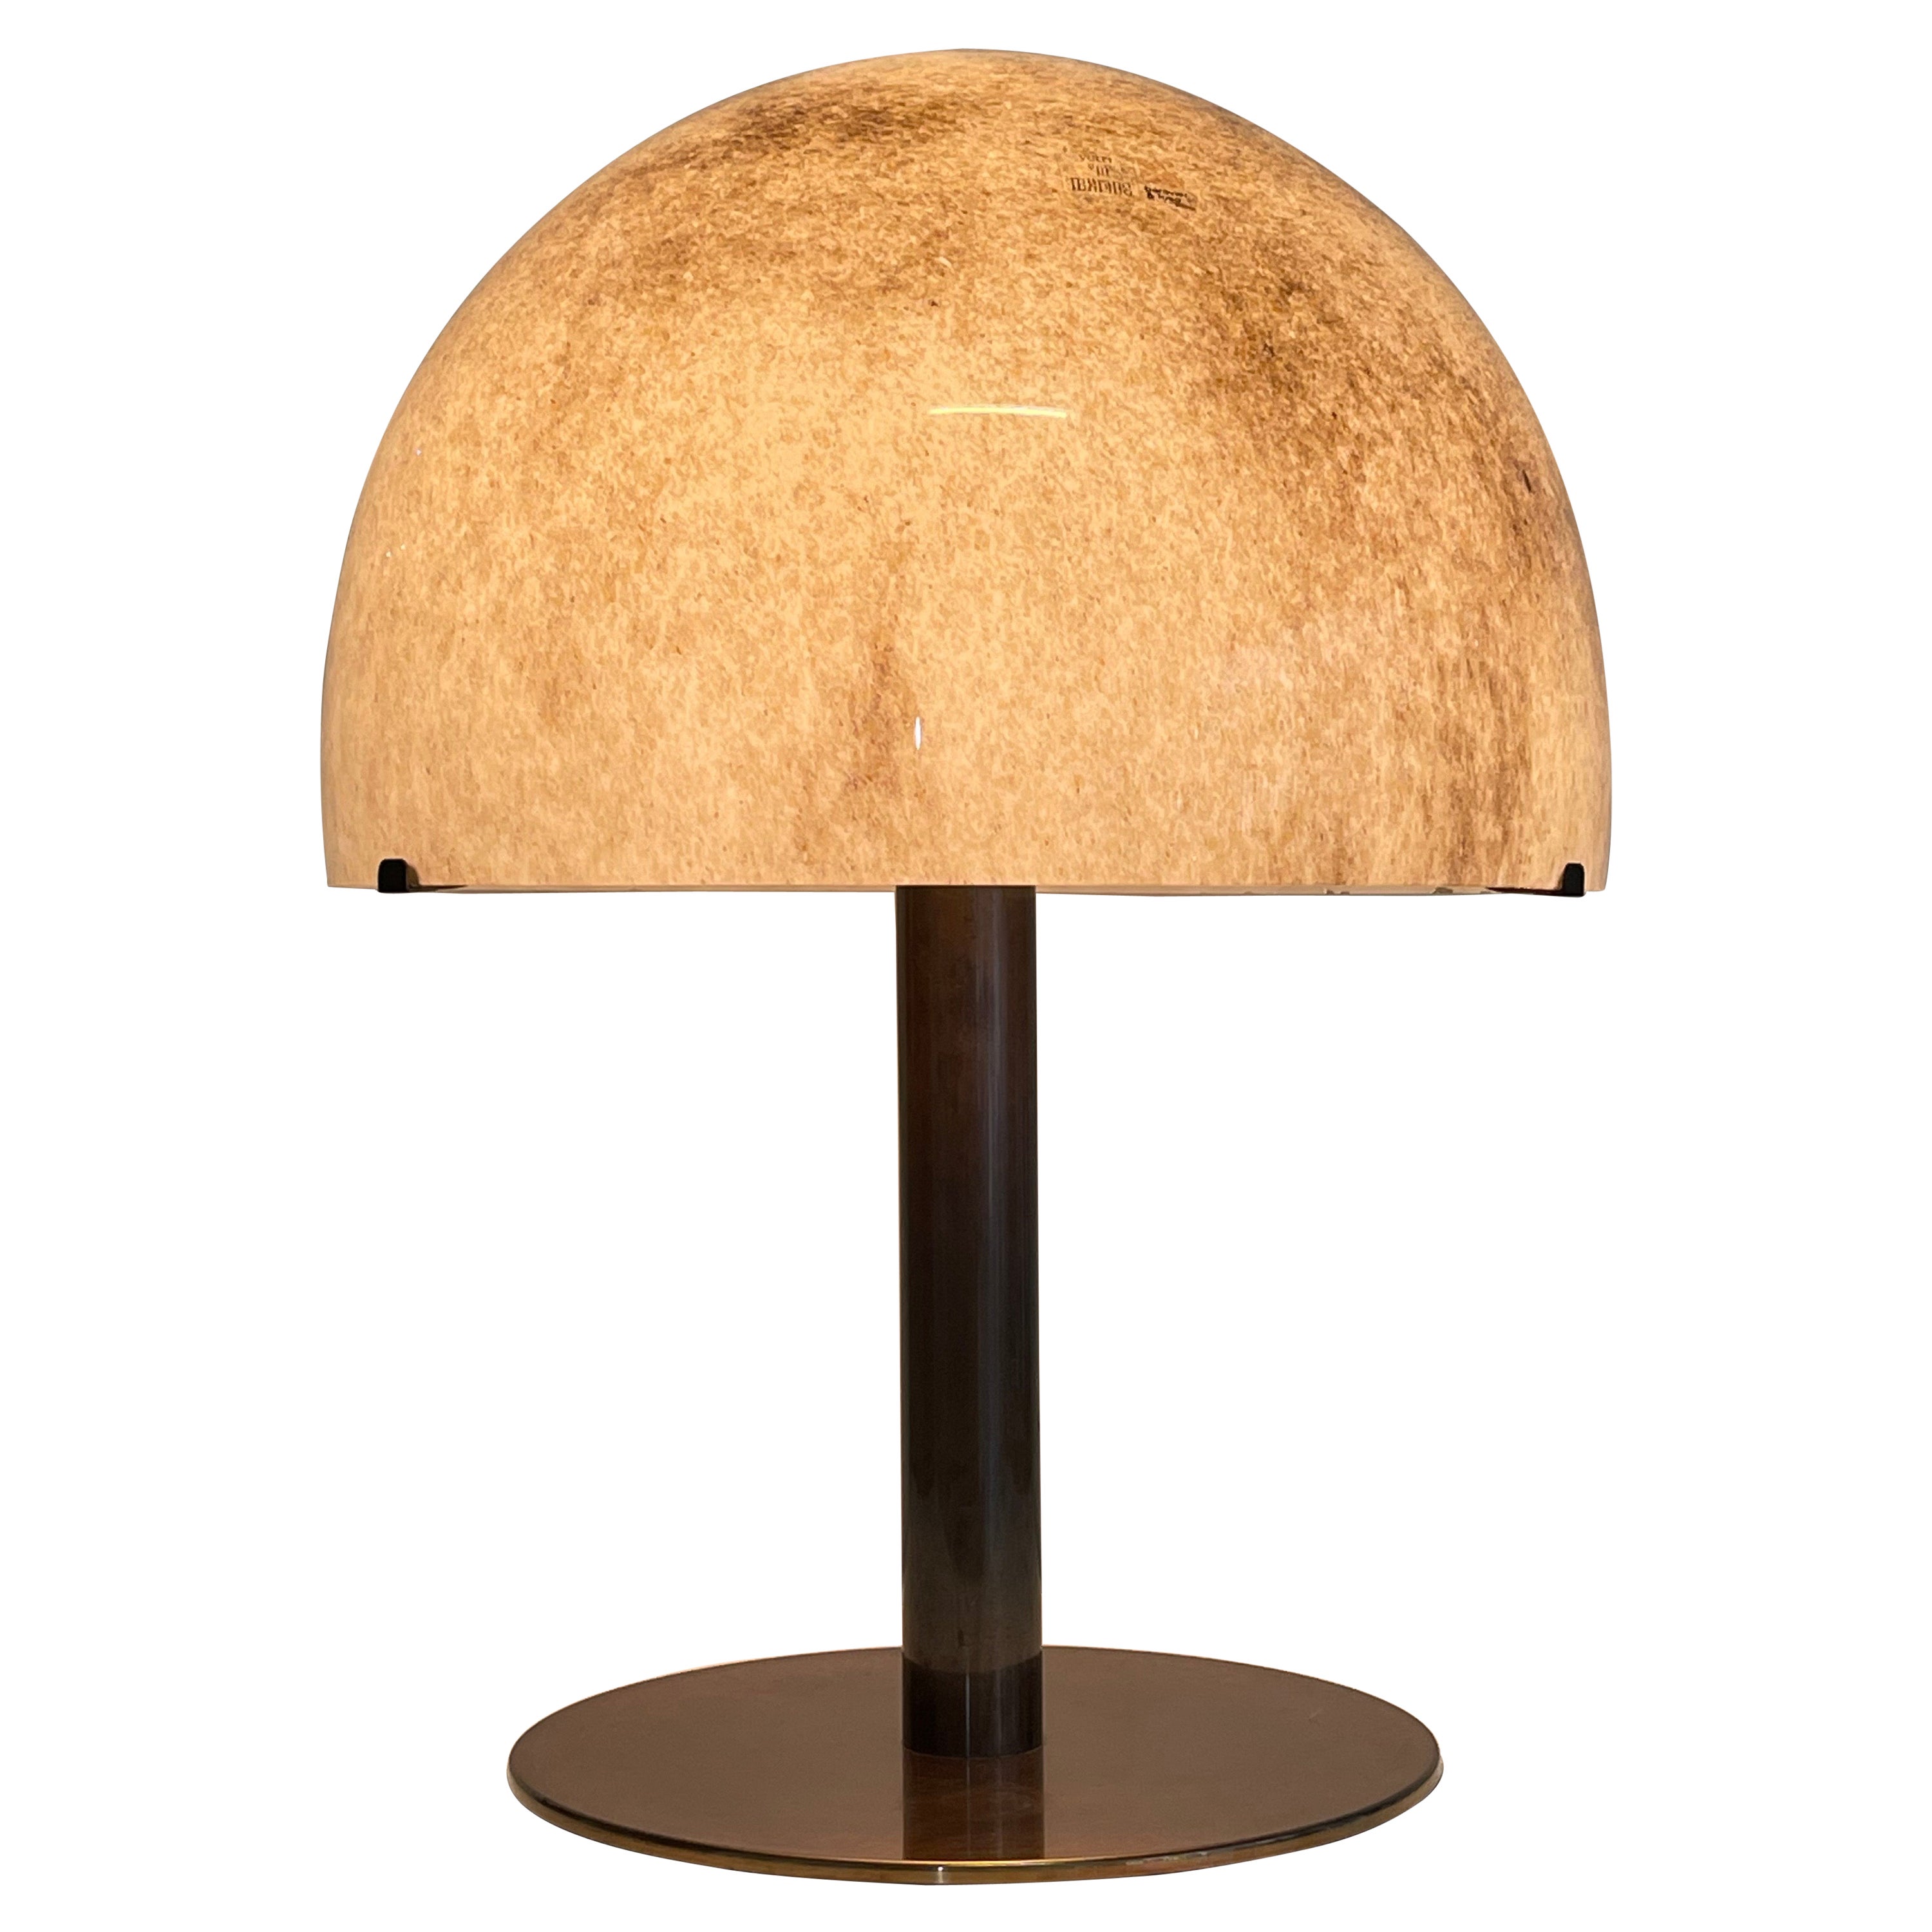 Large Murano Glas and Brass Mushroom Table Lamp by Barovier & Toso, ca. 1960s For Sale